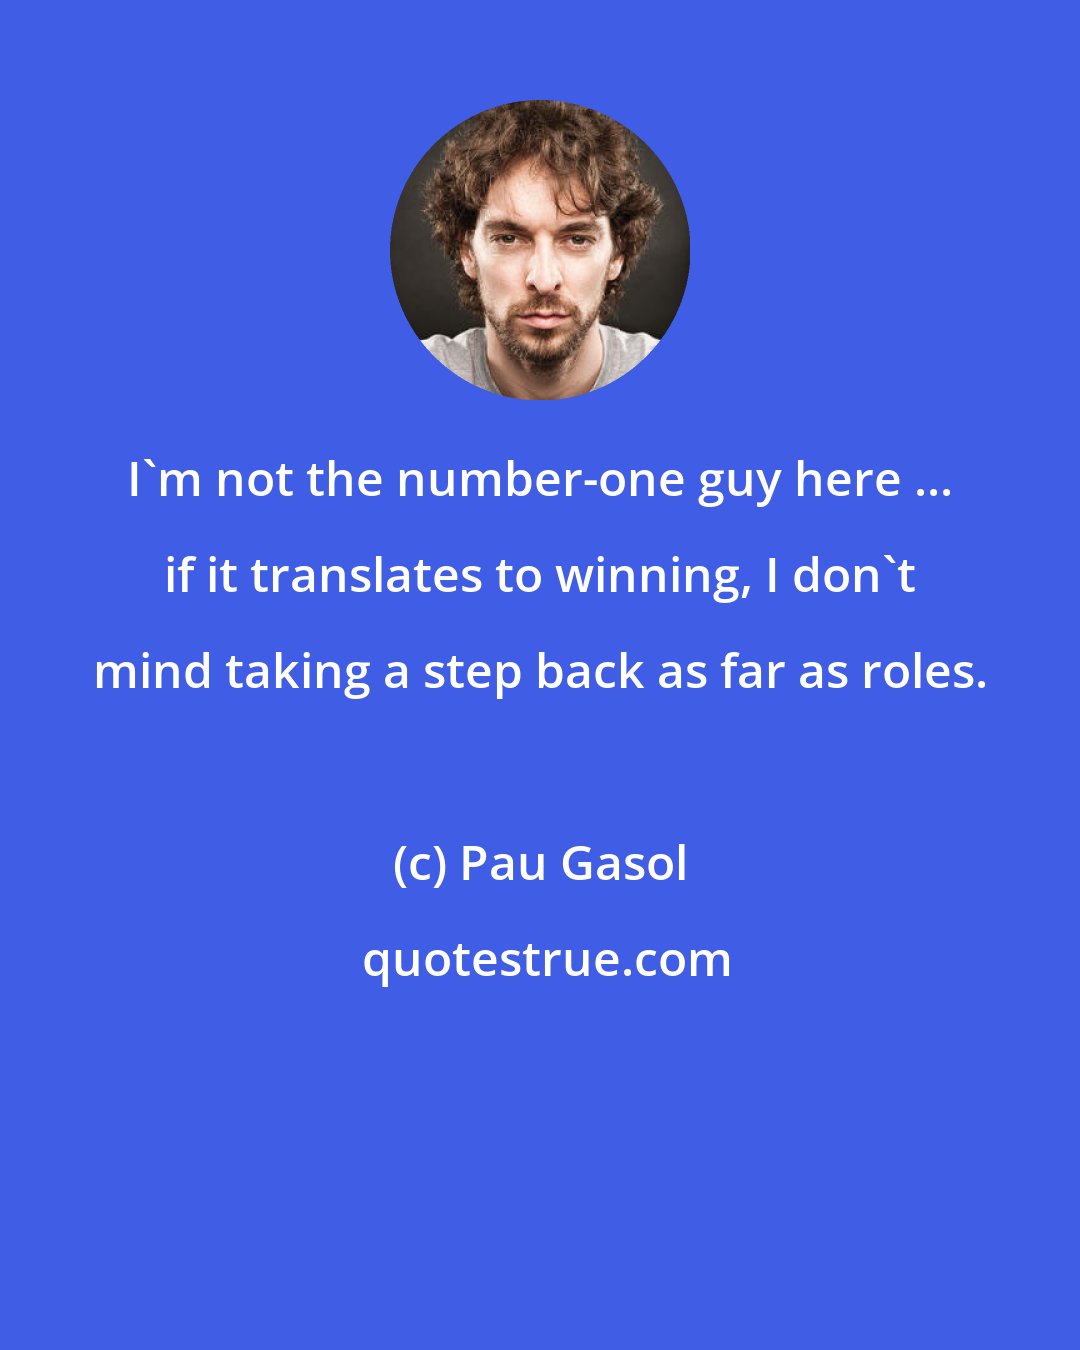 Pau Gasol: I'm not the number-one guy here ... if it translates to winning, I don't mind taking a step back as far as roles.